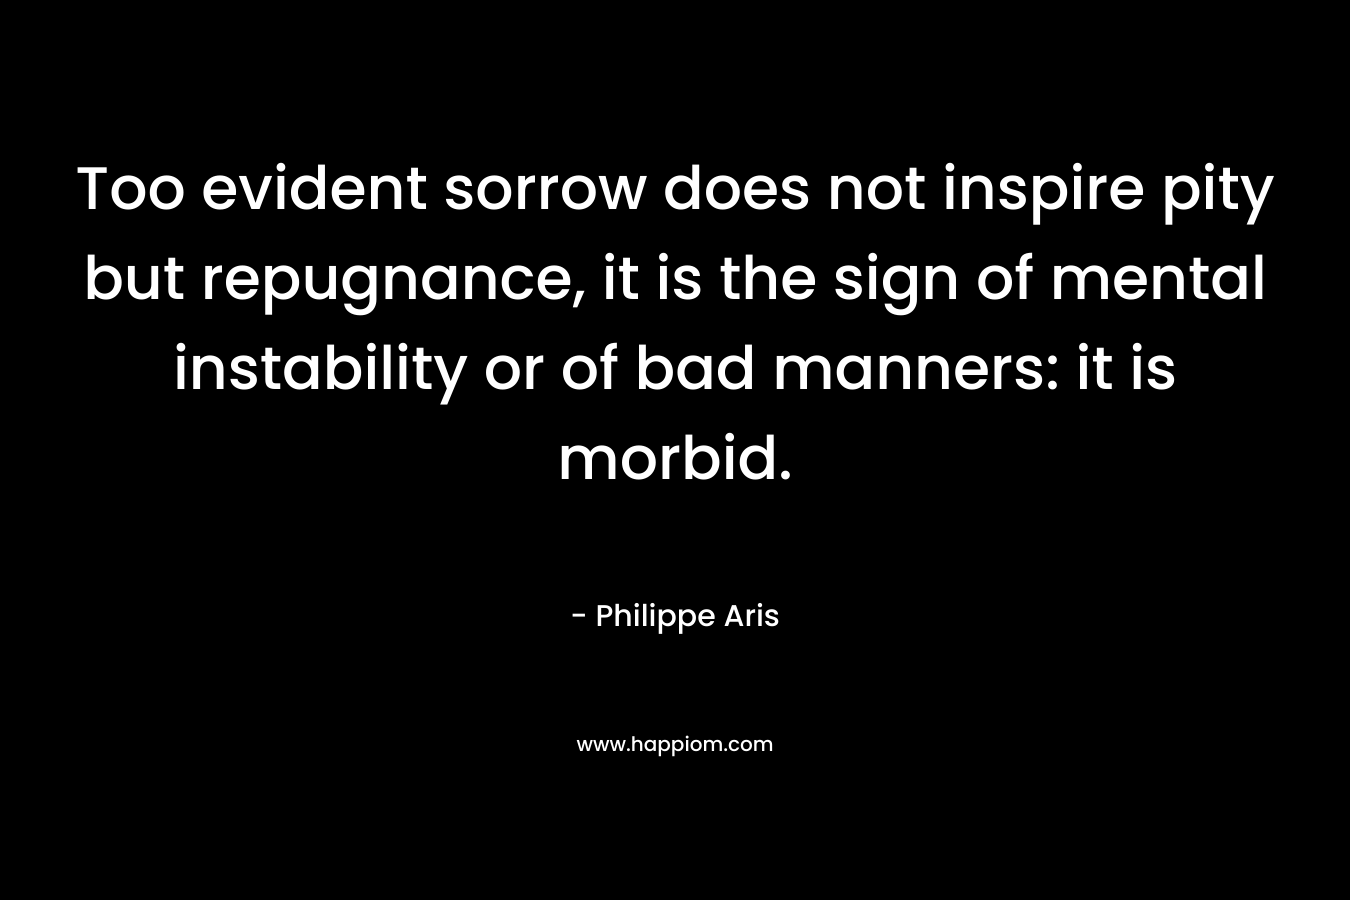 Too evident sorrow does not inspire pity but repugnance, it is the sign of mental instability or of bad manners: it is morbid.